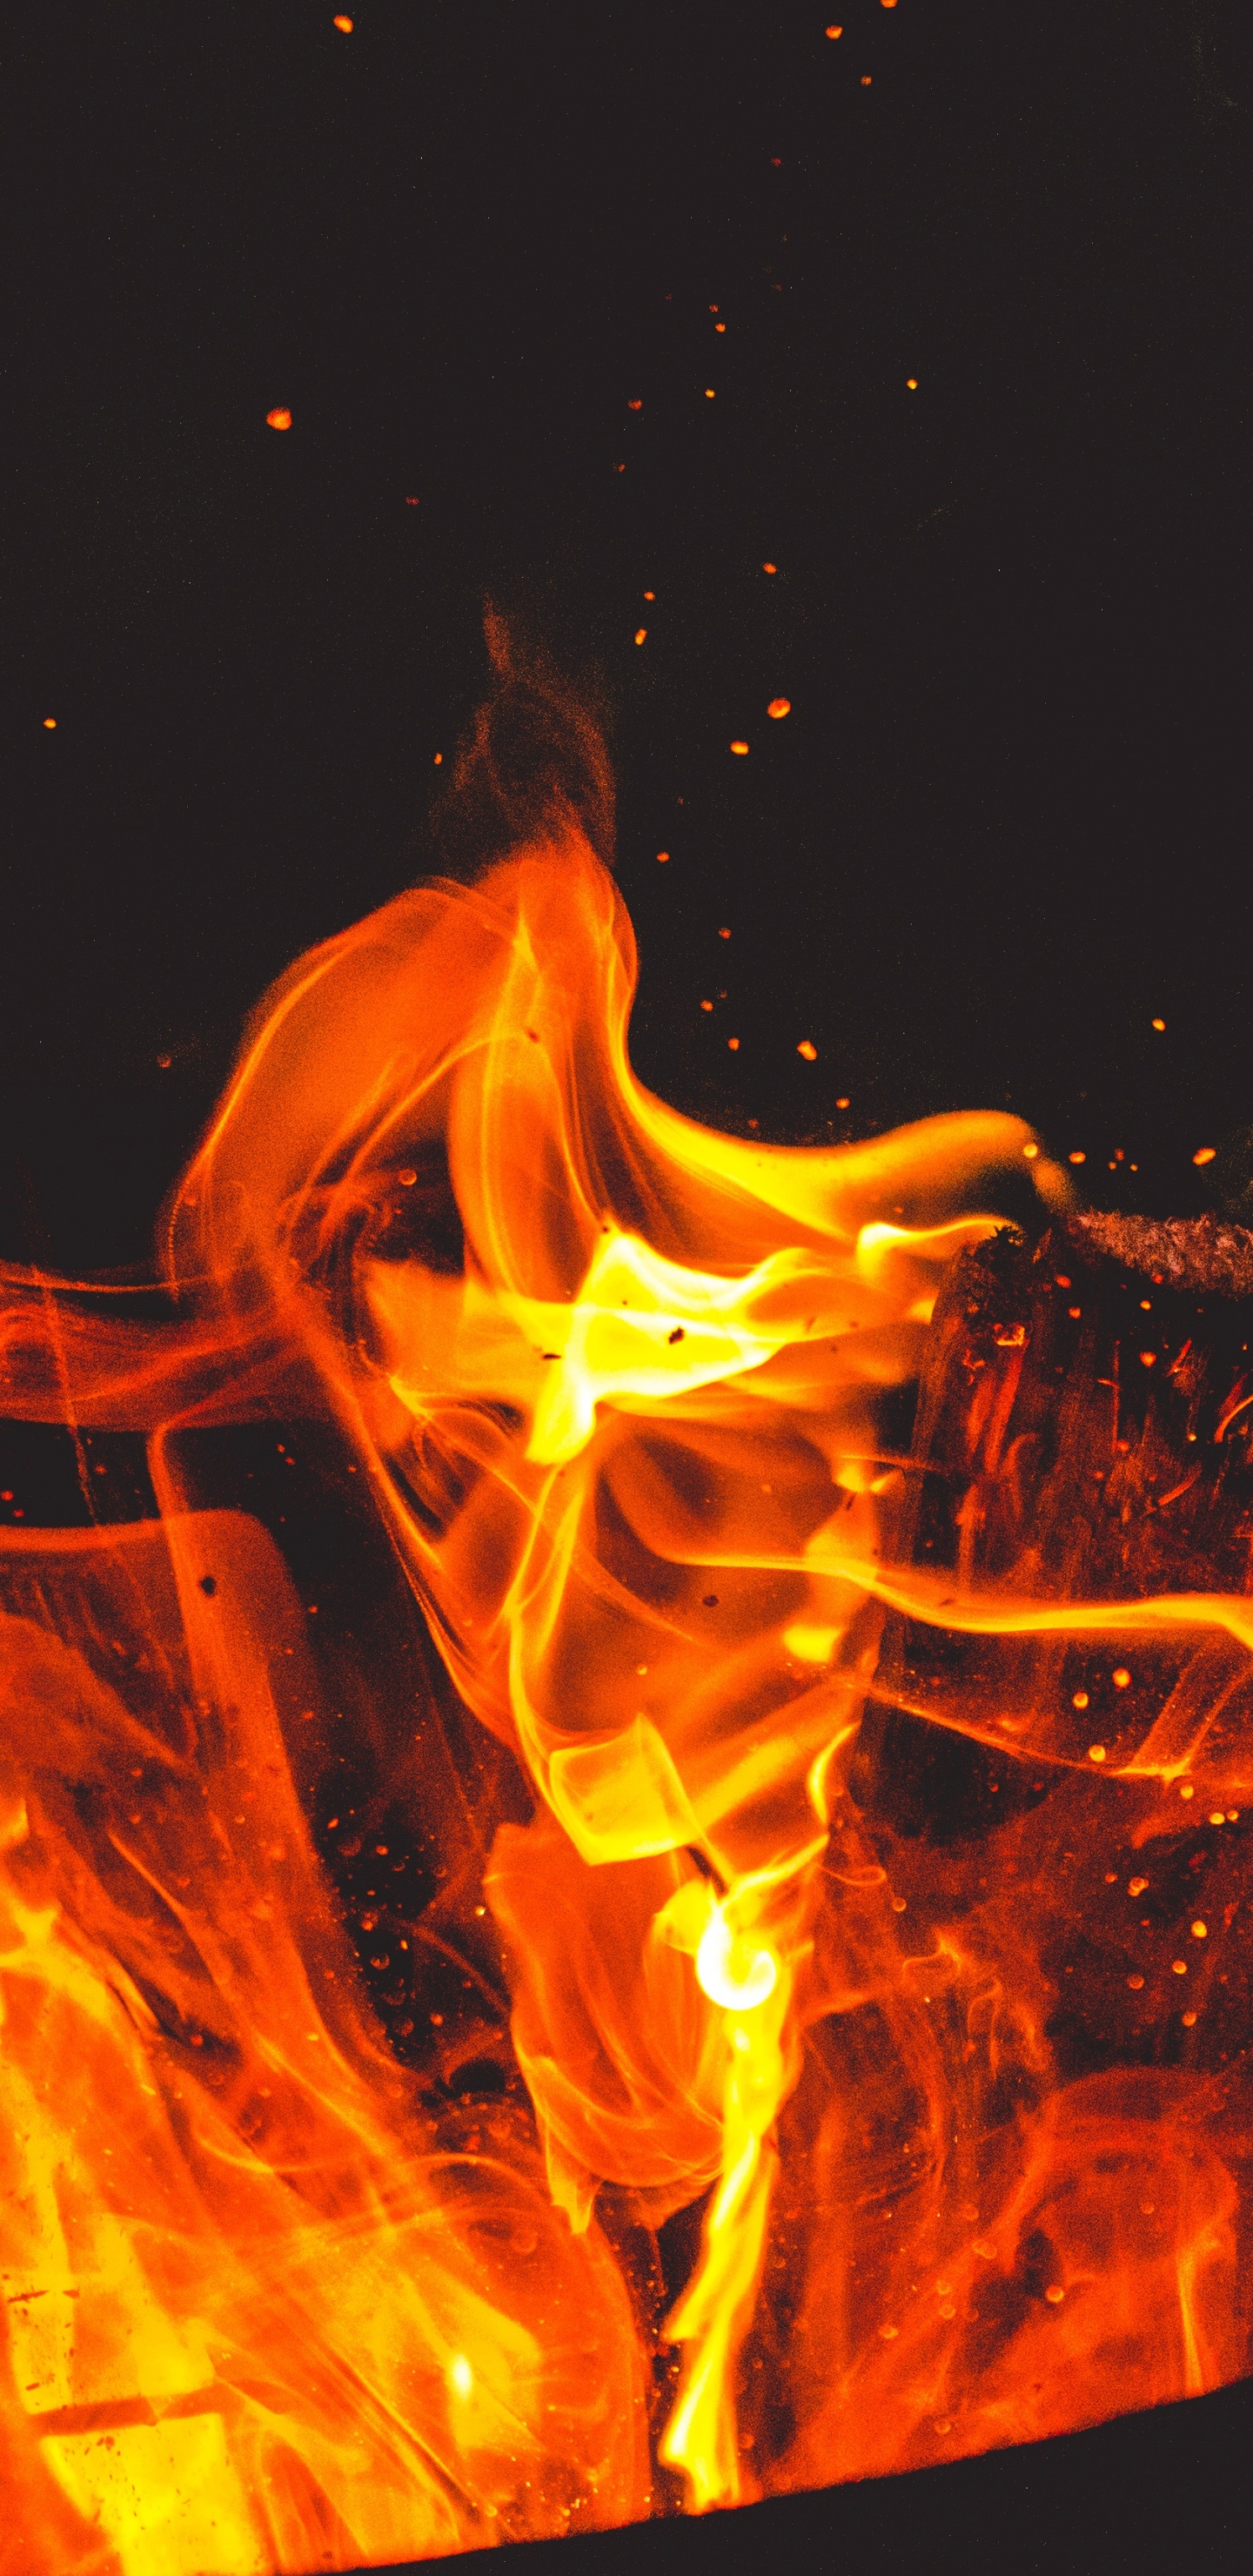 Orange and Yellow Flame Illustration. Wallpaper in 1440x2960 Resolution